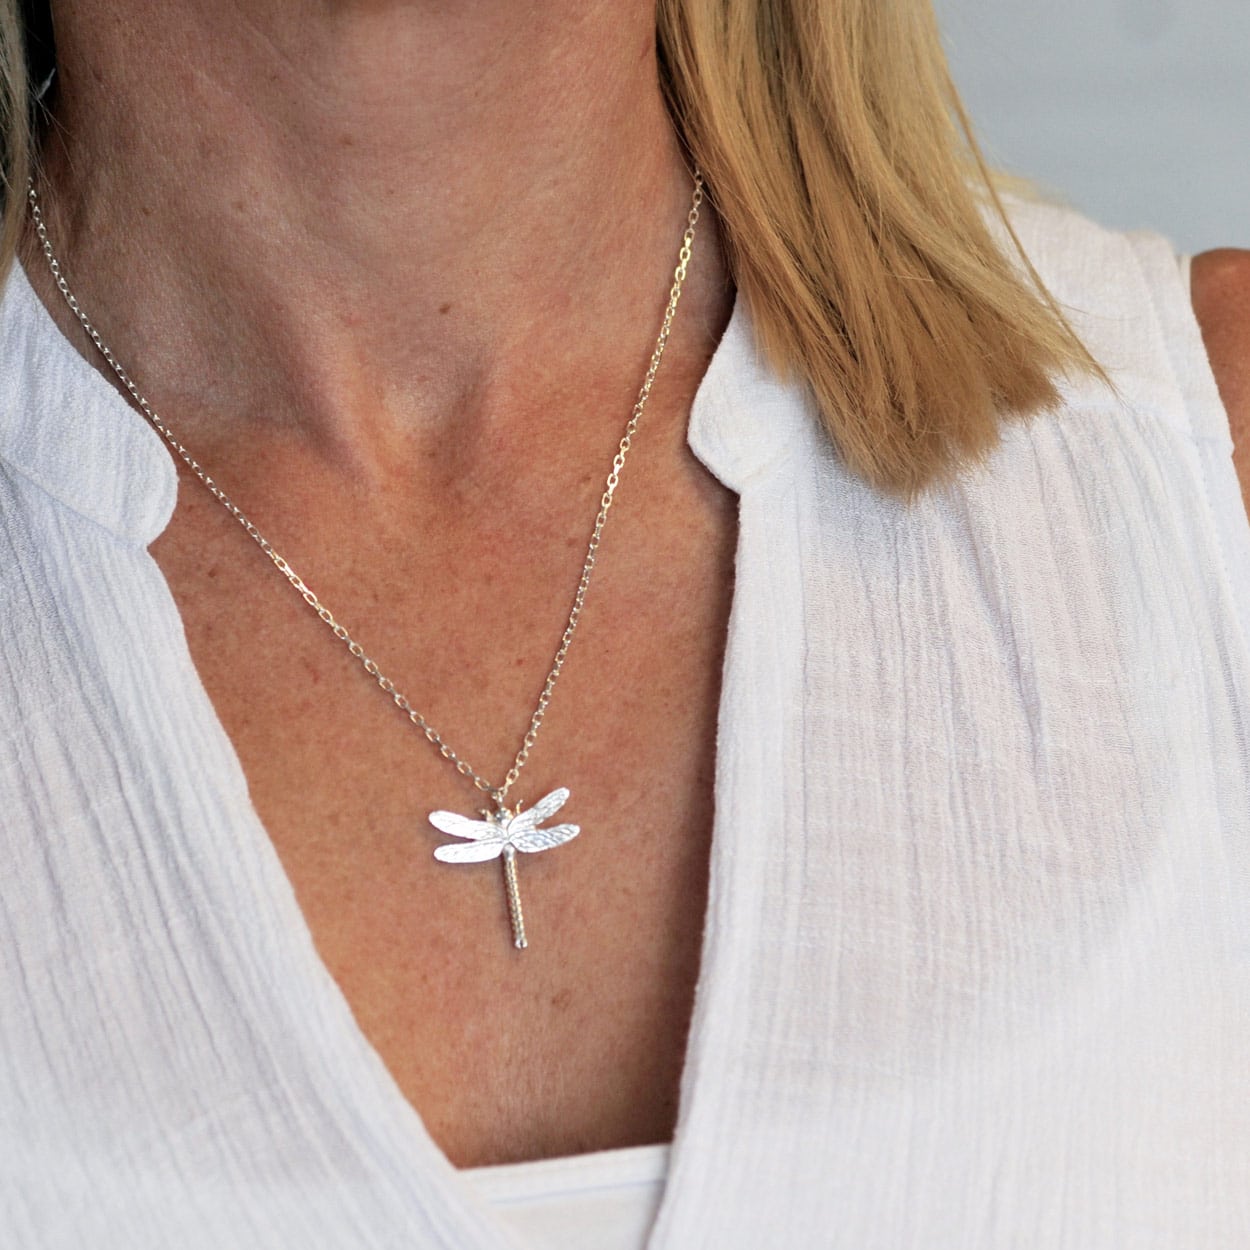 Ladies Necklace | Dragonfly Pendant & Chain | Sanity Jewelry